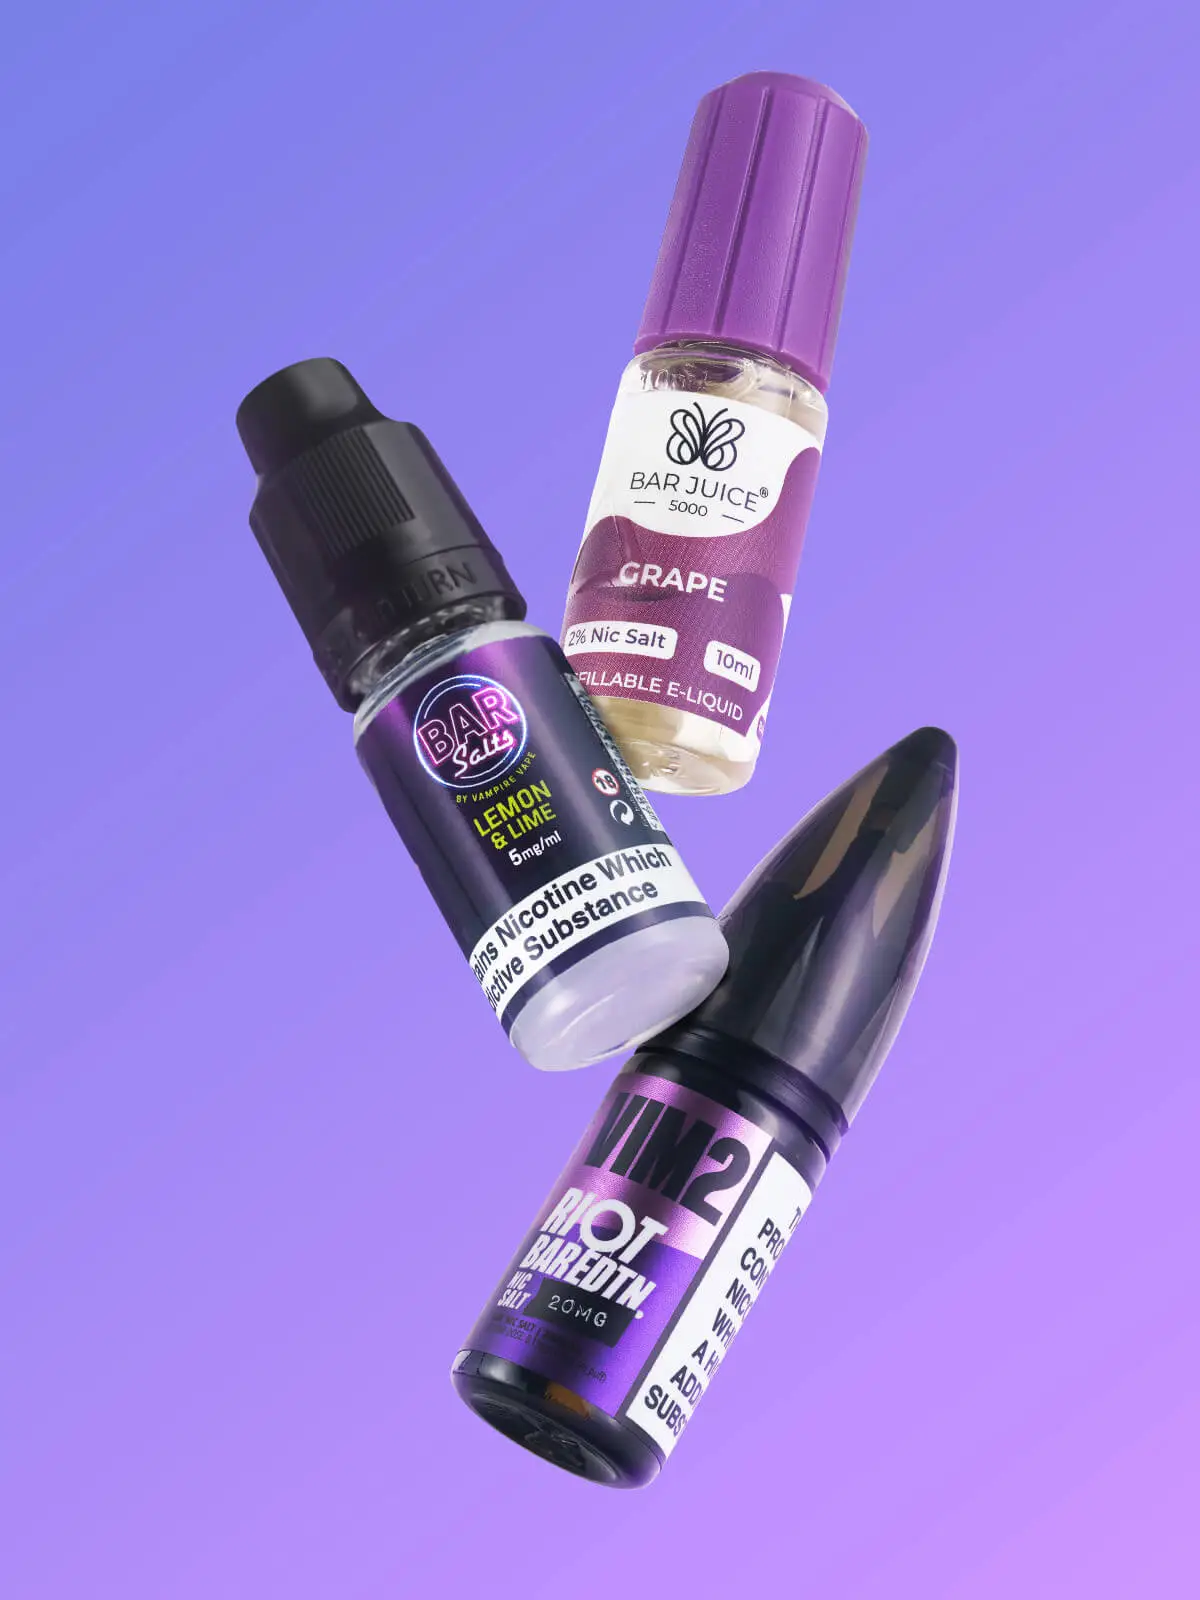 Three bottles of e-liquid; BAR Salts Lemon & Lime, Bar Juice 5000 Grape and Riot Bar Edtn VIM2, floating in front of a purple background